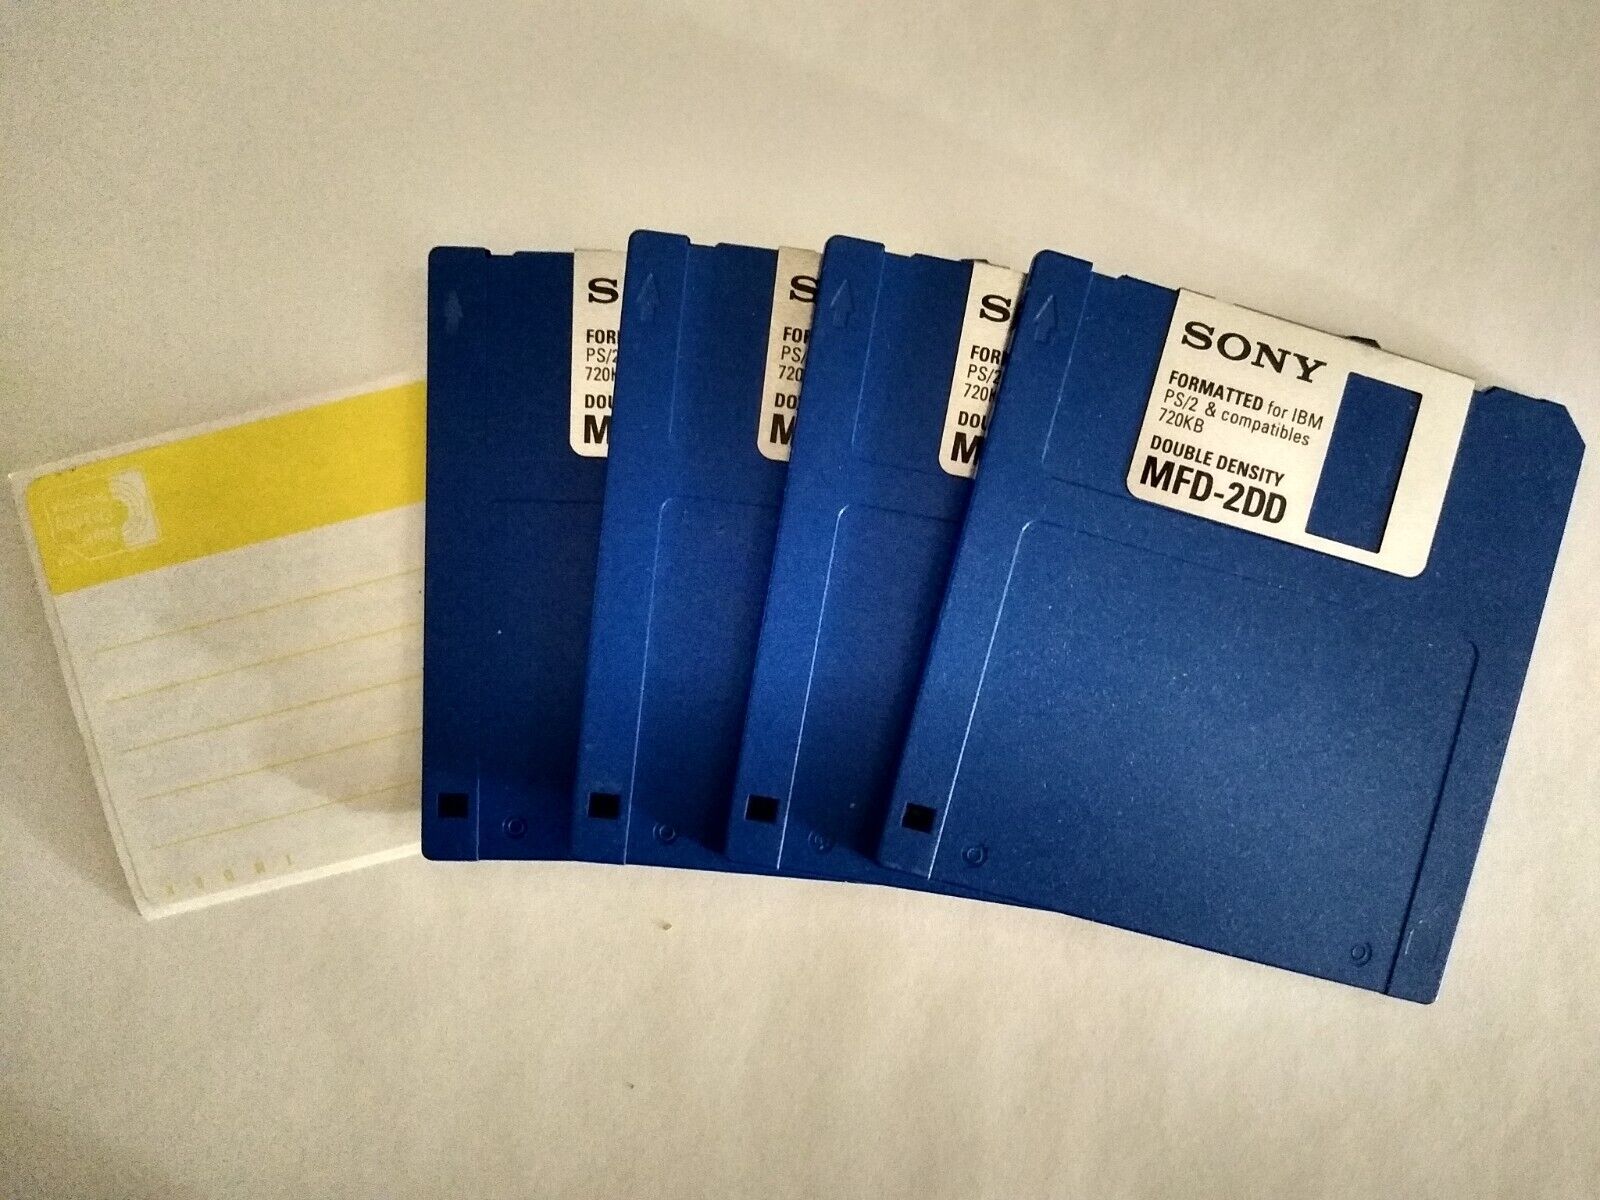 Sony 10MFD-2DD (Double Density) 3.5\'\' Diskettes (4 Diskettes Remaining)